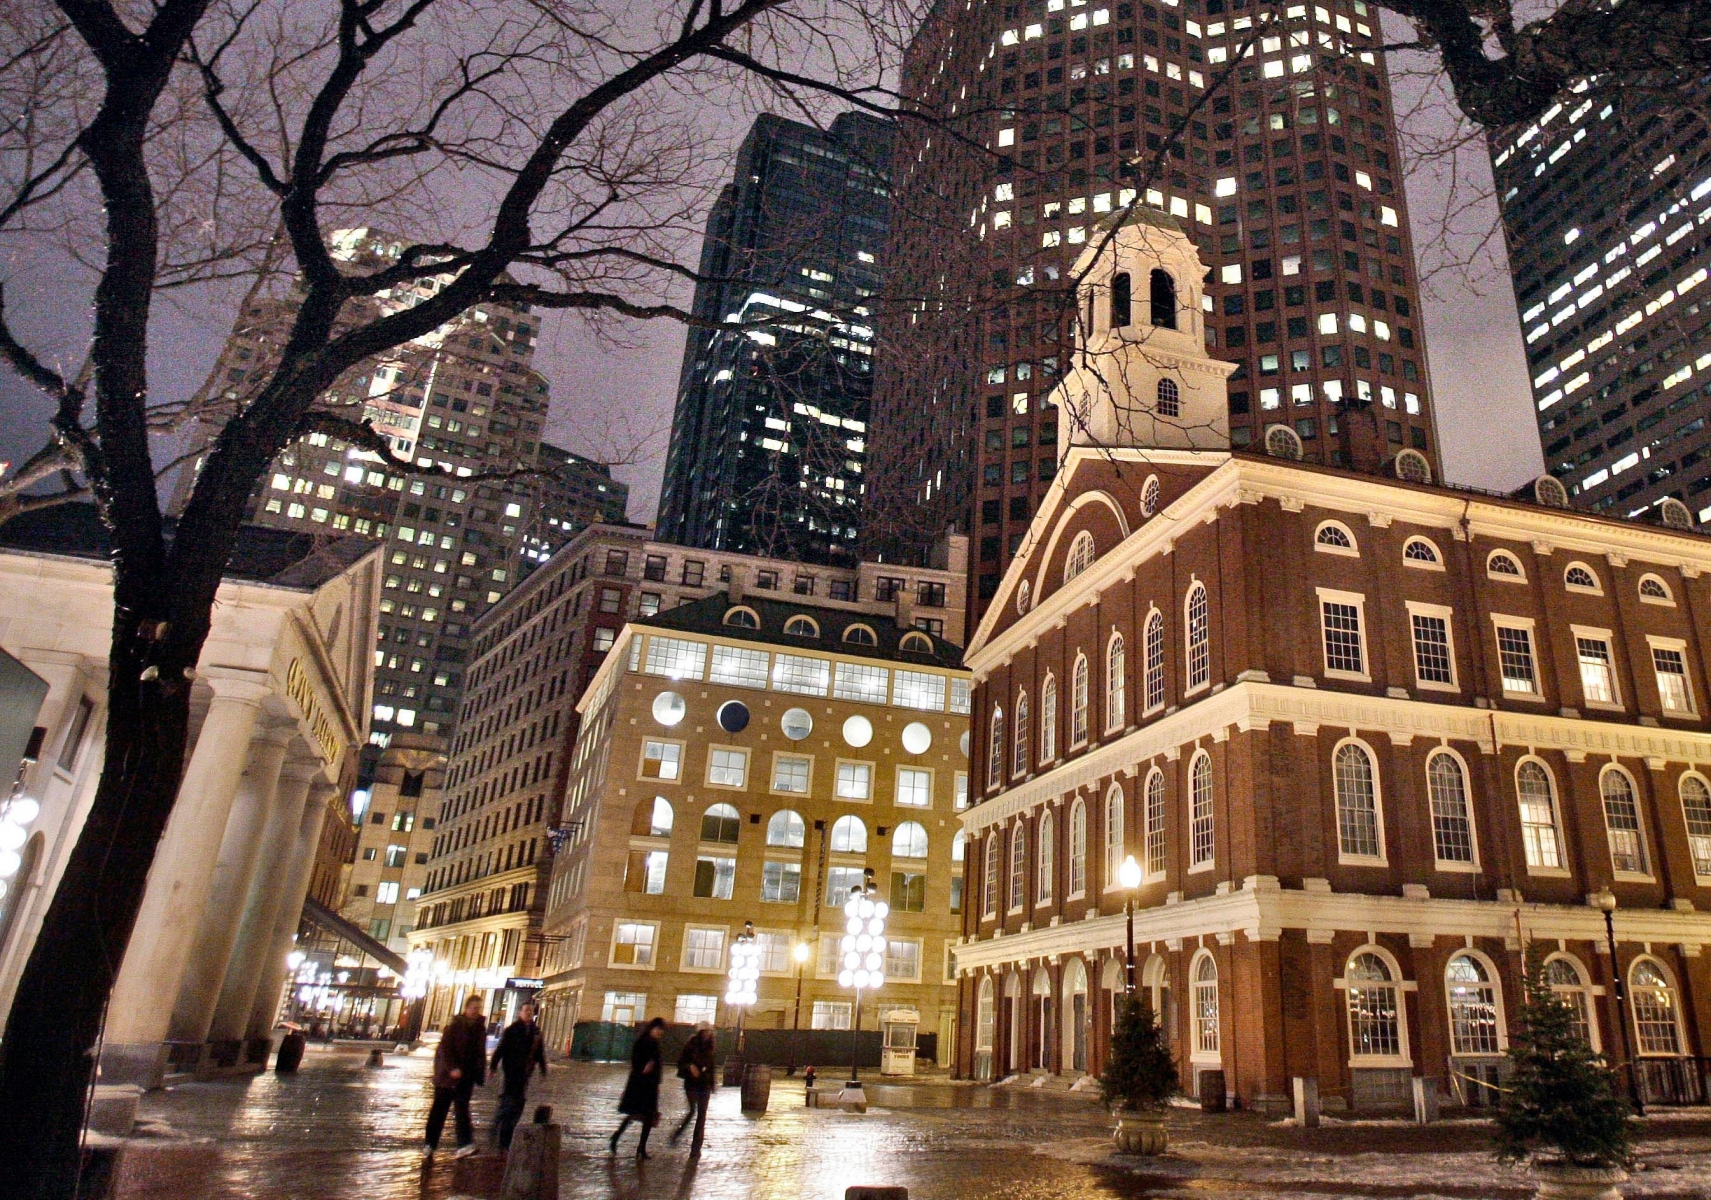 FILE - In this Feb. 22, 2007 file photo, Faneuil Hall, right, one of the sites on Boston's Freedom Trail, sits among buildings on an evening in downtown in Boston. With scientists forecasting sea levels to rise by anywhere from several inches to several feet by 2100, historic structures and coastal heritage sites around the world are under threat. A multidisciplinary conference is scheduled to convene in Newport, R.I., this week to discuss preserving those structures and neighborhoods that could be threatened by rising seas. (AP Photo/Michael Dwyer, File) DROWNING HISTORY